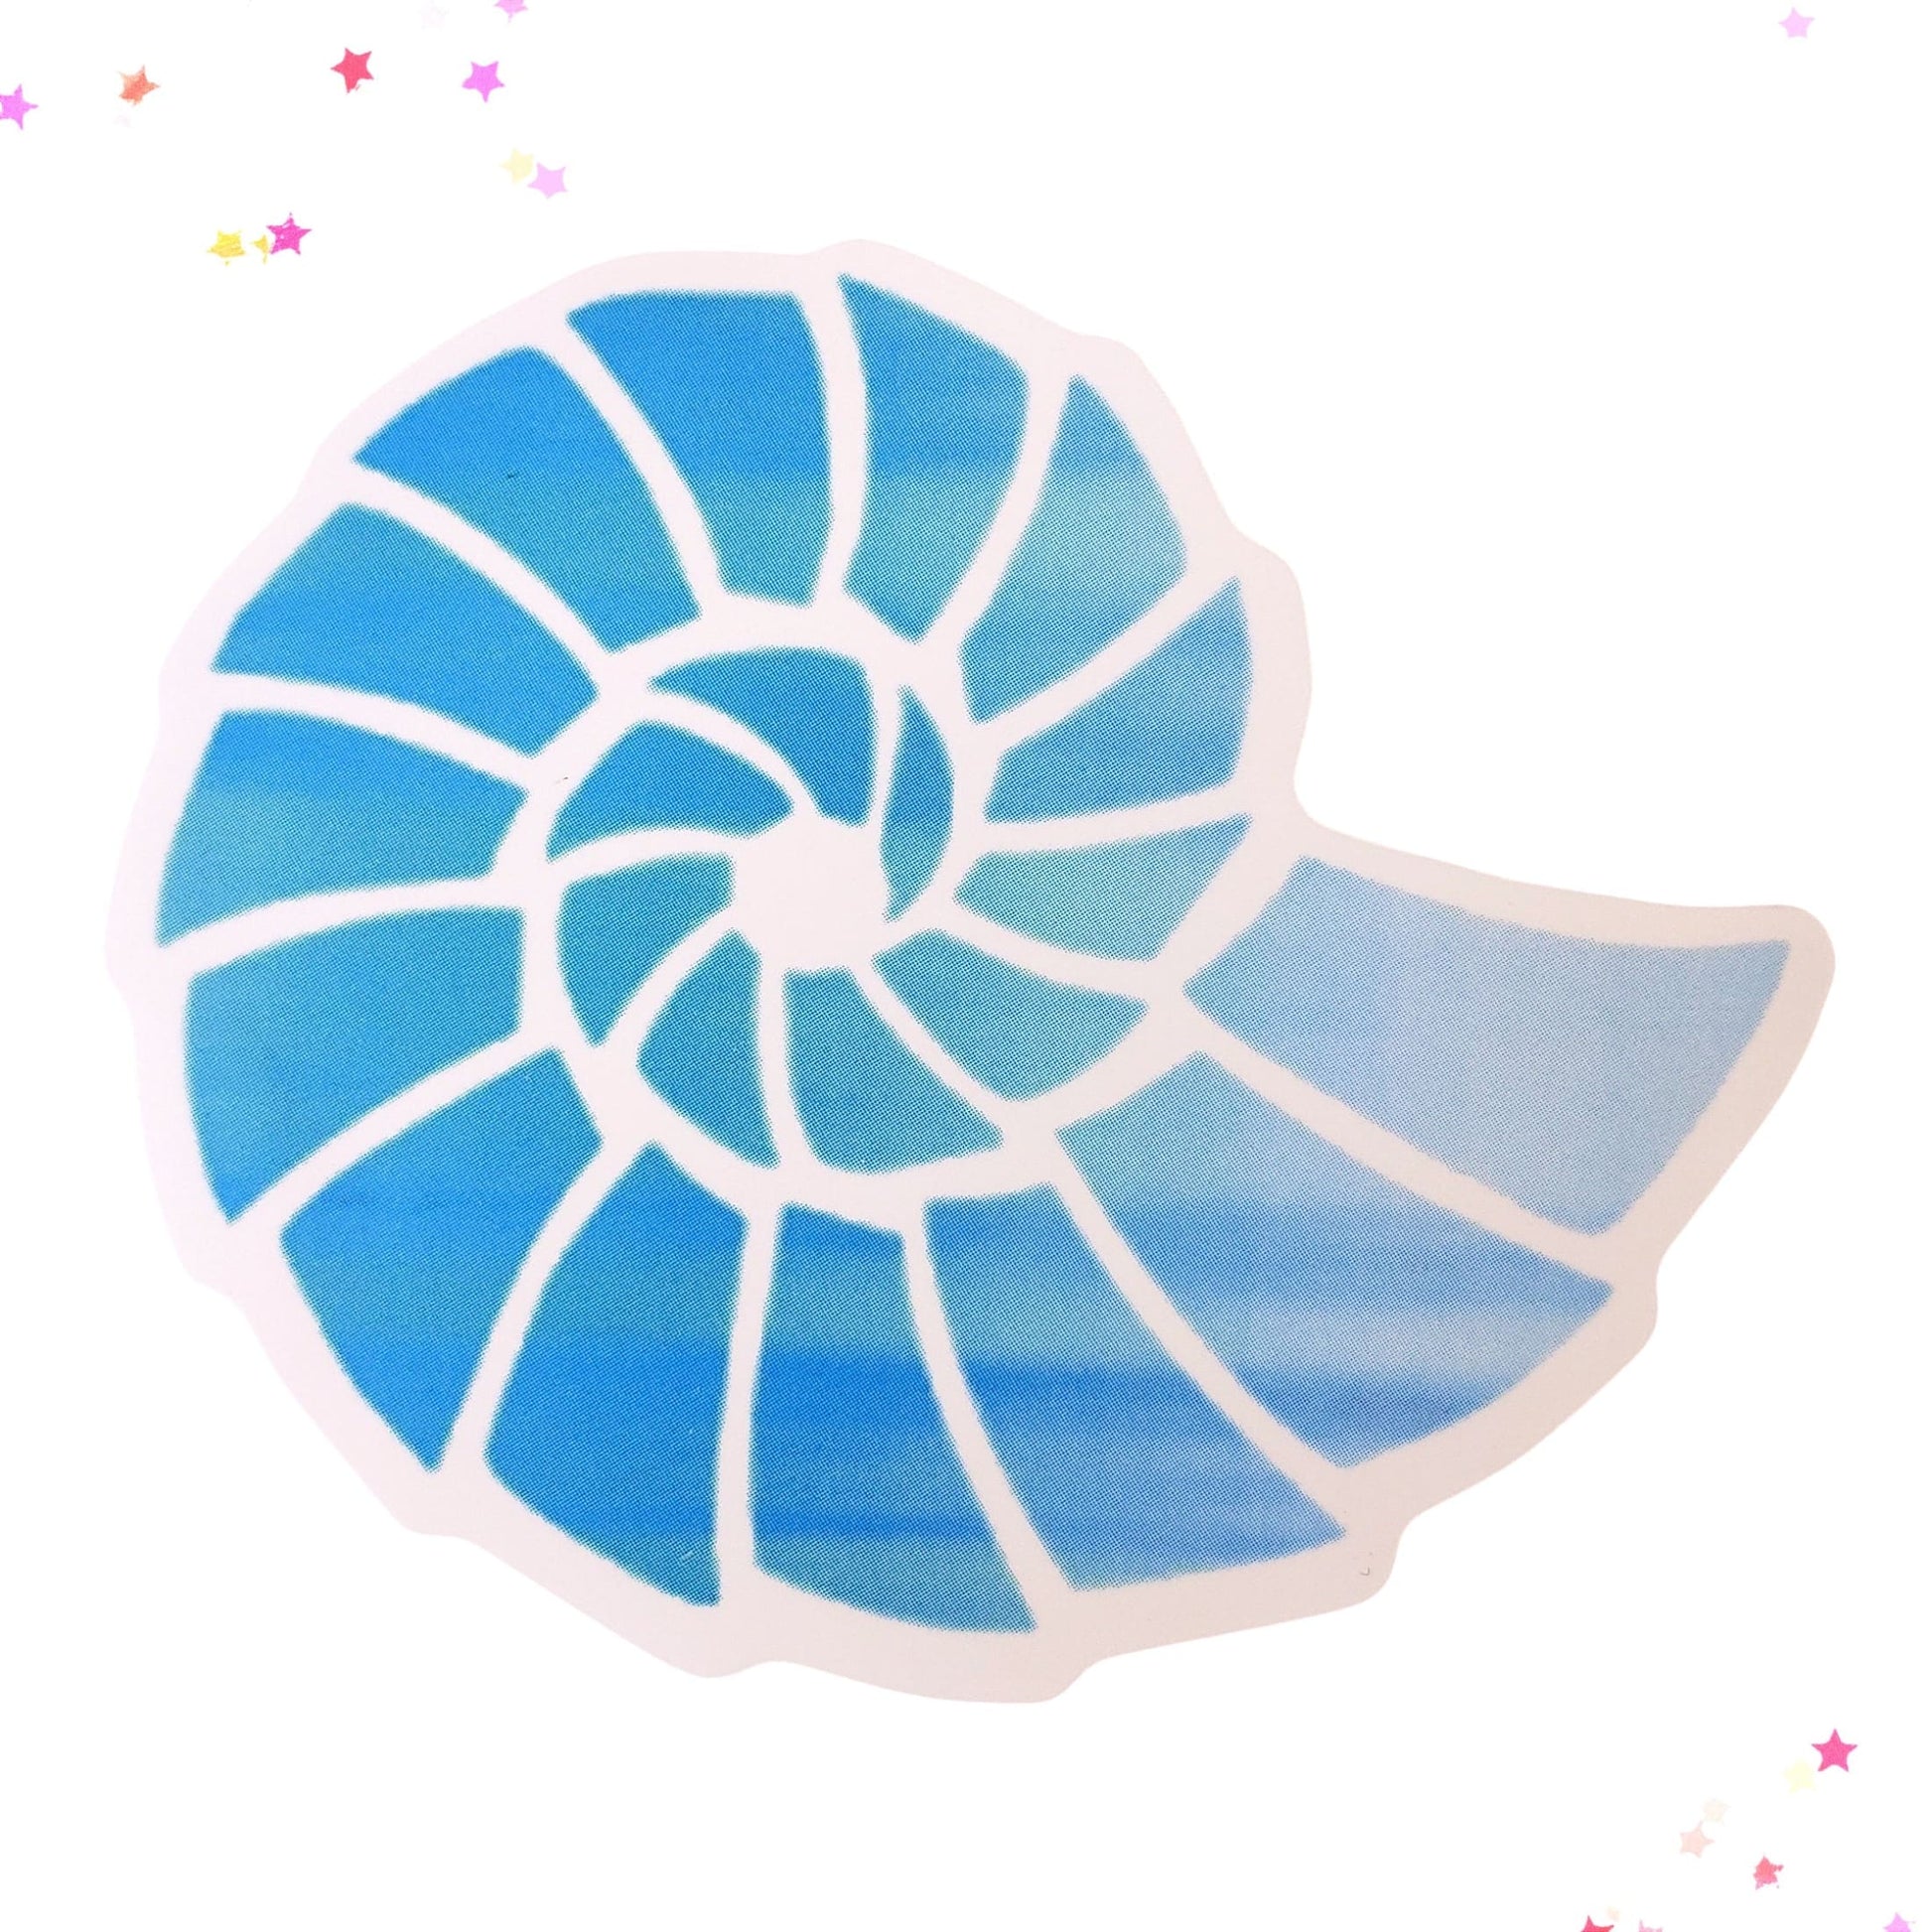 Spiral Shell Waterproof Sticker from Confetti Kitty, Only 1.00